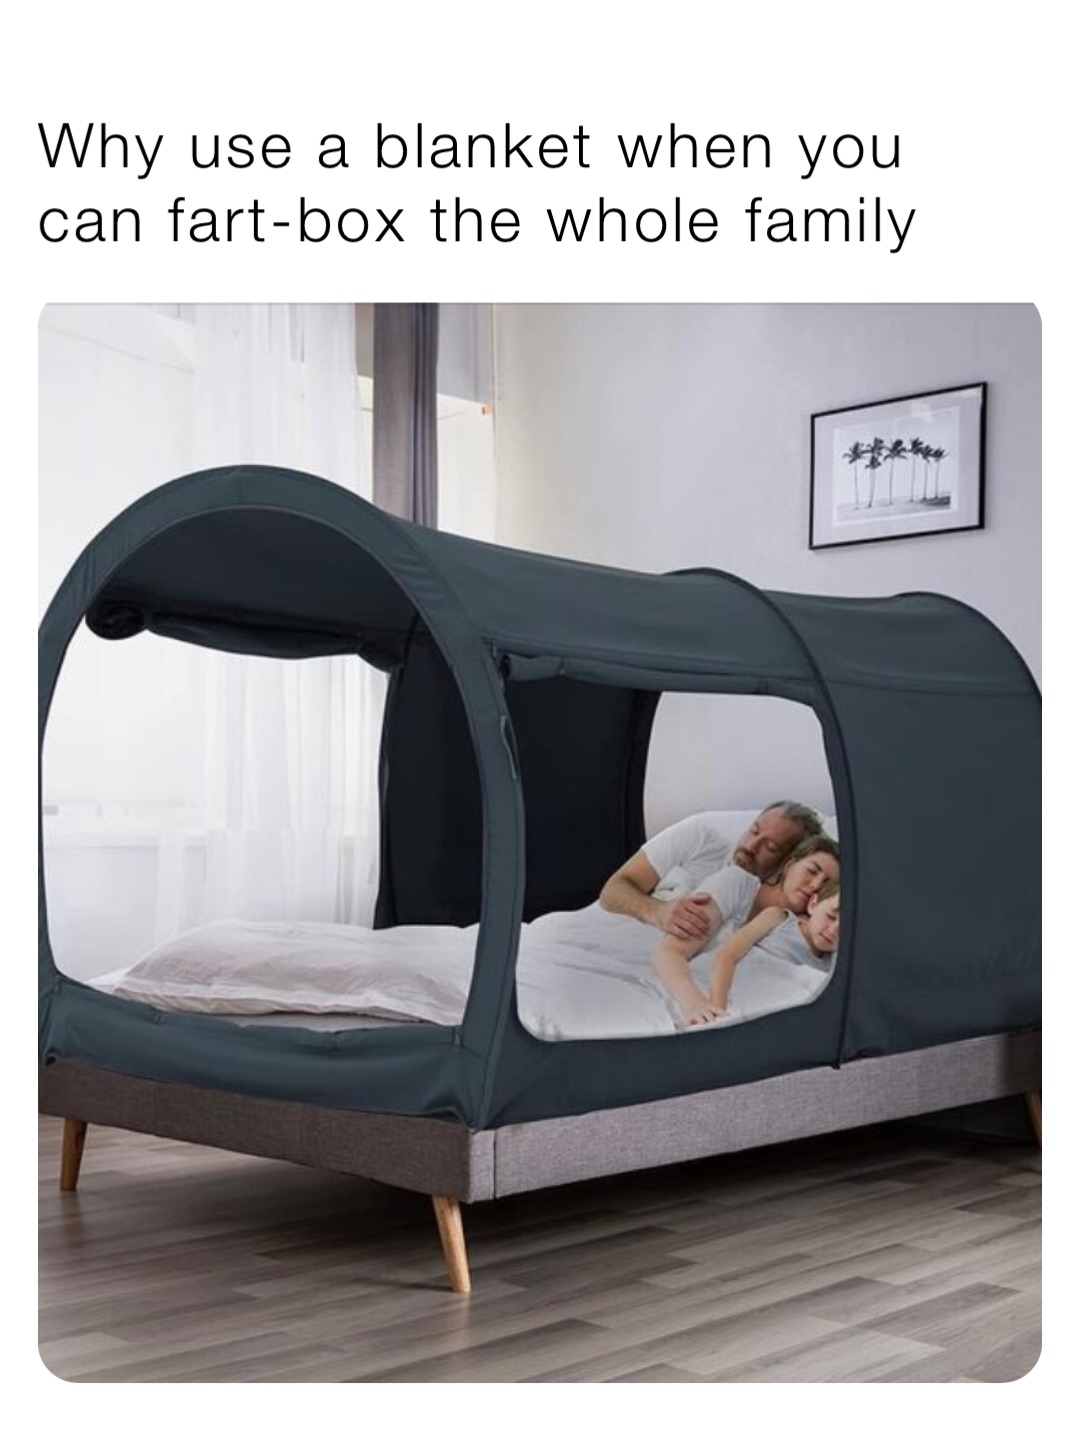 Why use a blanket when you can fart-box the whole family